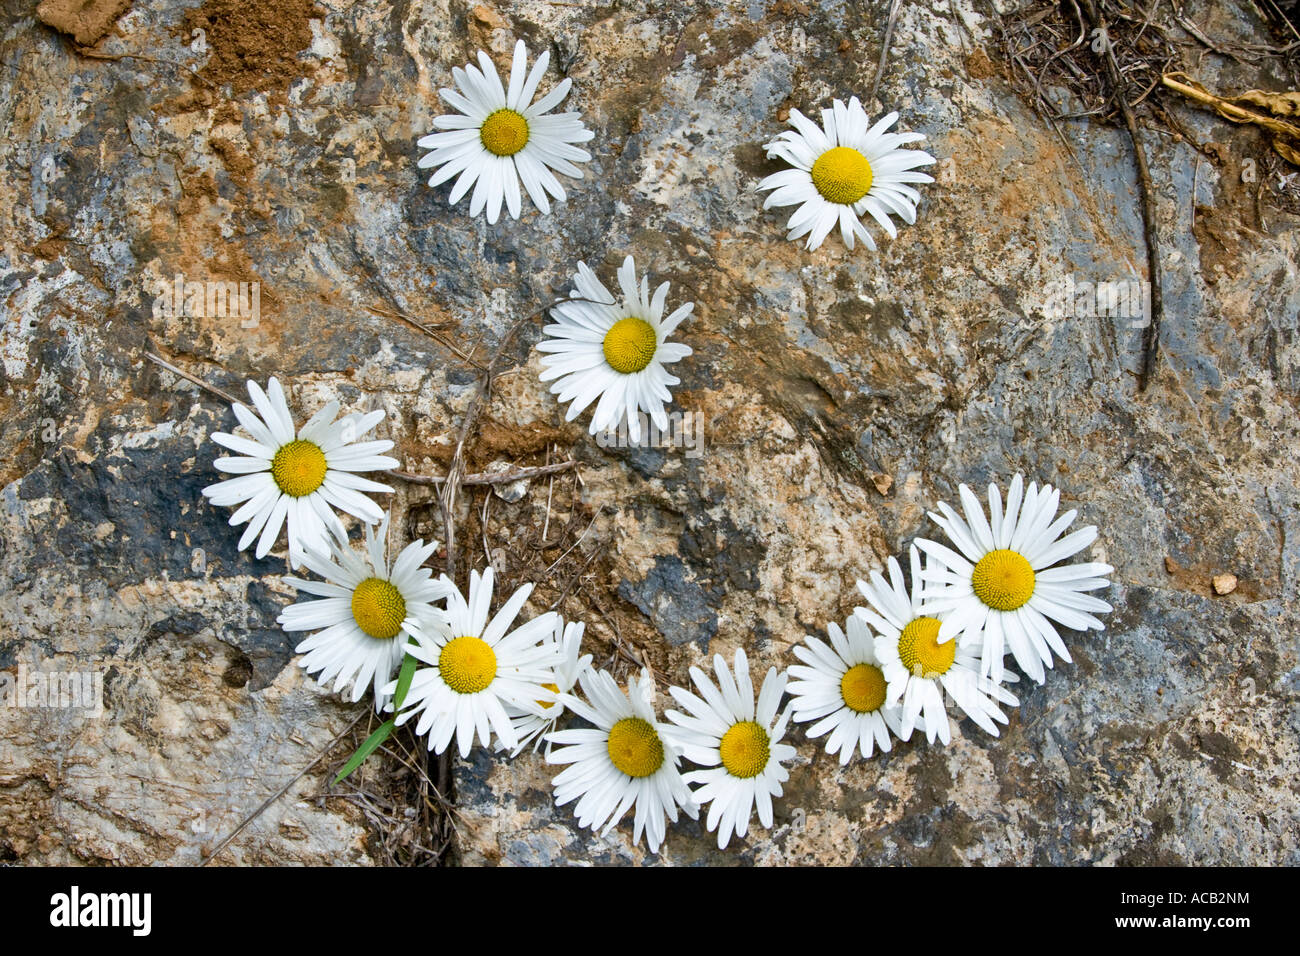 Happy Smiley Face Made of Daisies on Textured Rock Stock Photo